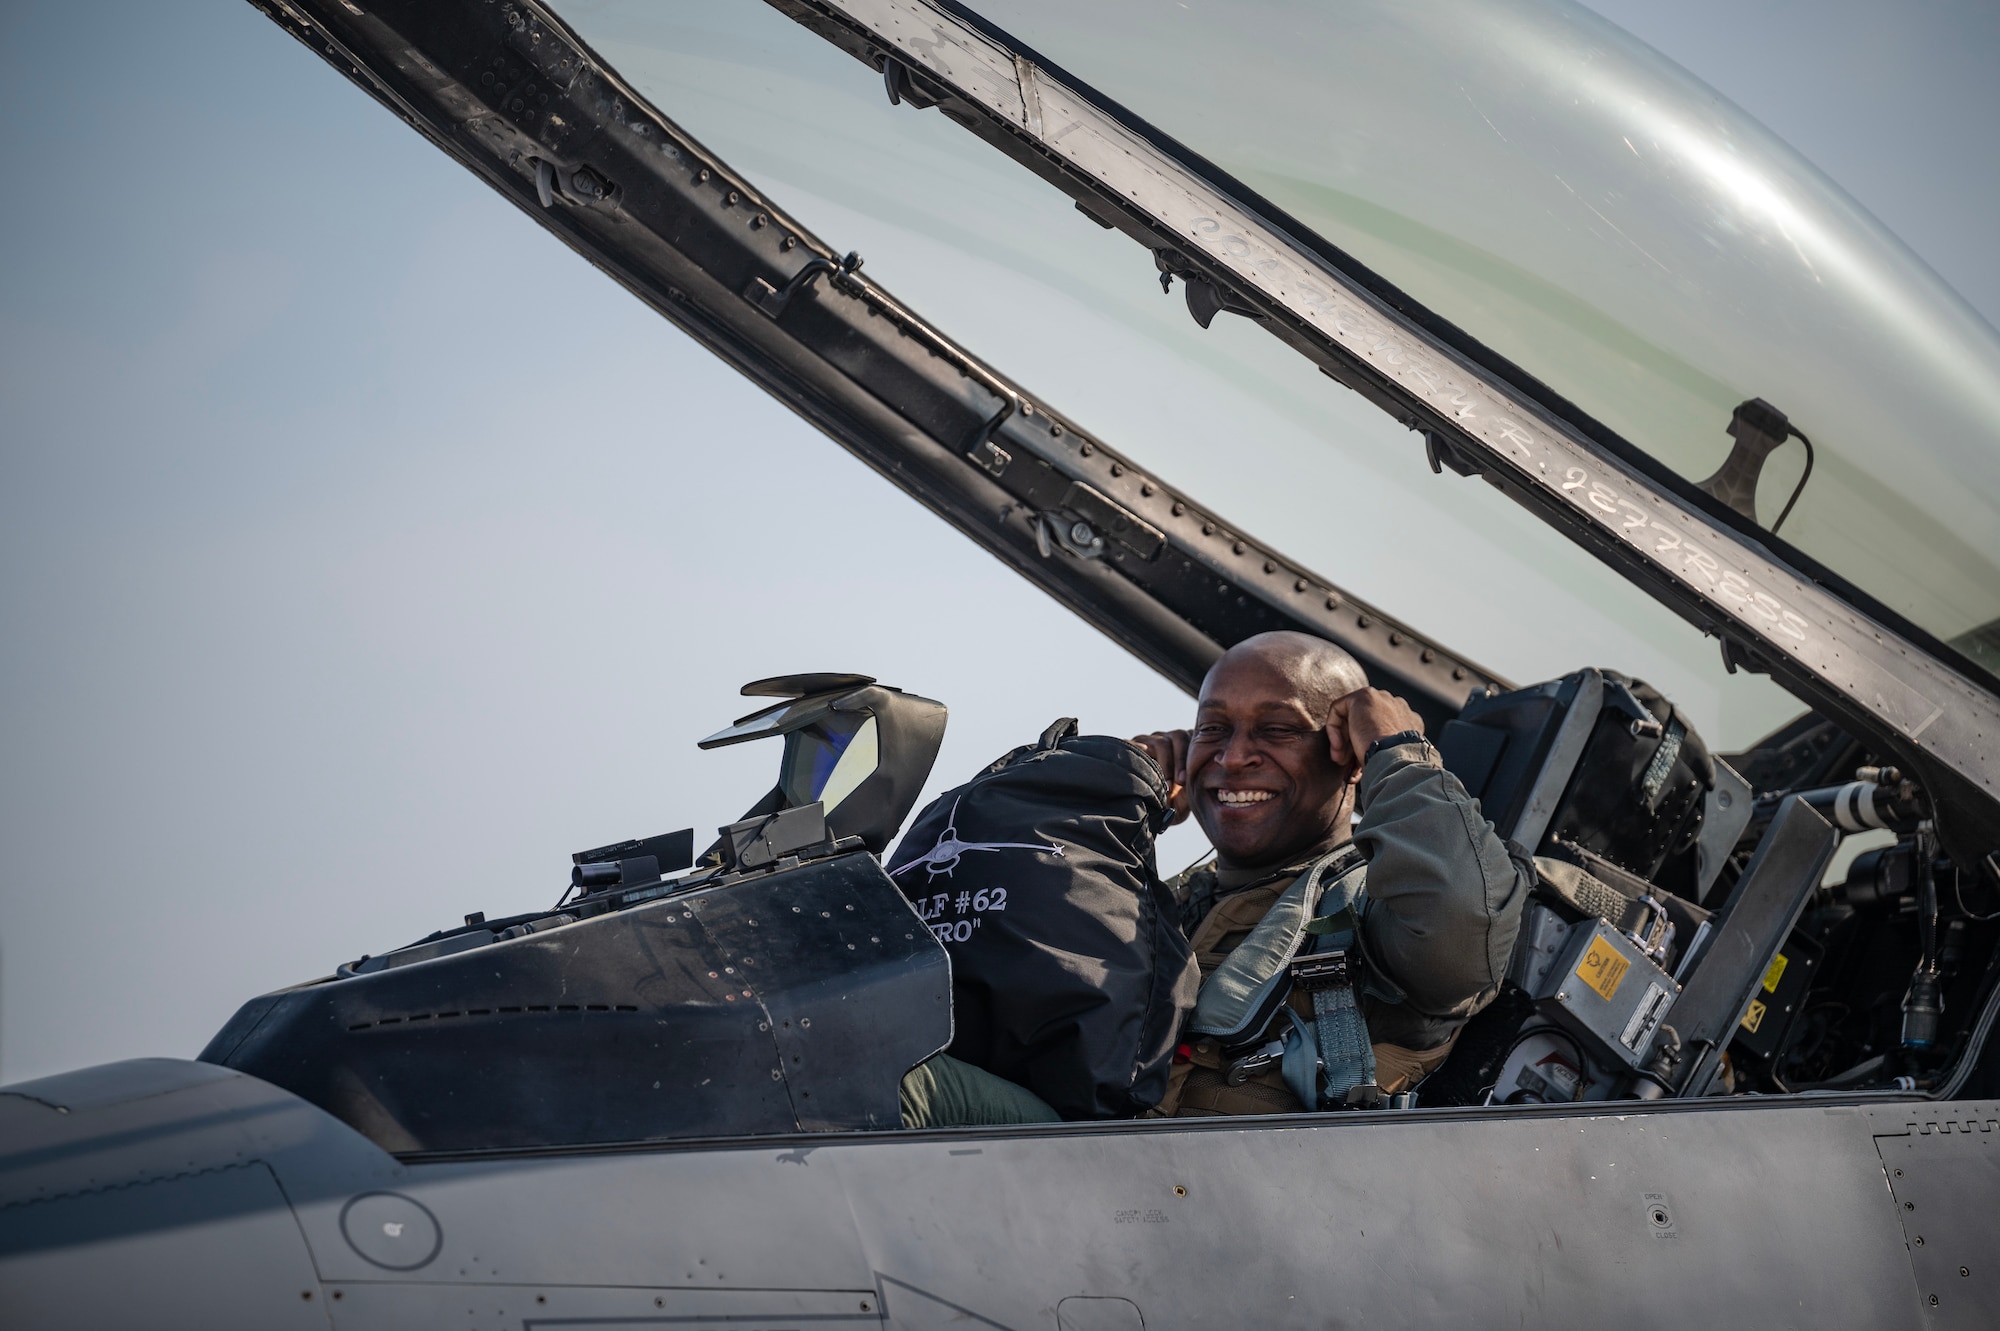 Col. Henry R. Jeffress, III, 8th Fighter Wing commander, prepares to disembark upon completing his final flight in an F-16 Fighting Falcon at Osan Air Base, Republic of Korea, May 17, 2023. As a commander, Jeffress plays a key role in the execution of military operations to include counter-air, aerial interdiction, and close-air support on the Korean Peninsula. (U.S. Air Force photo by Senior Airman Karla Parra)